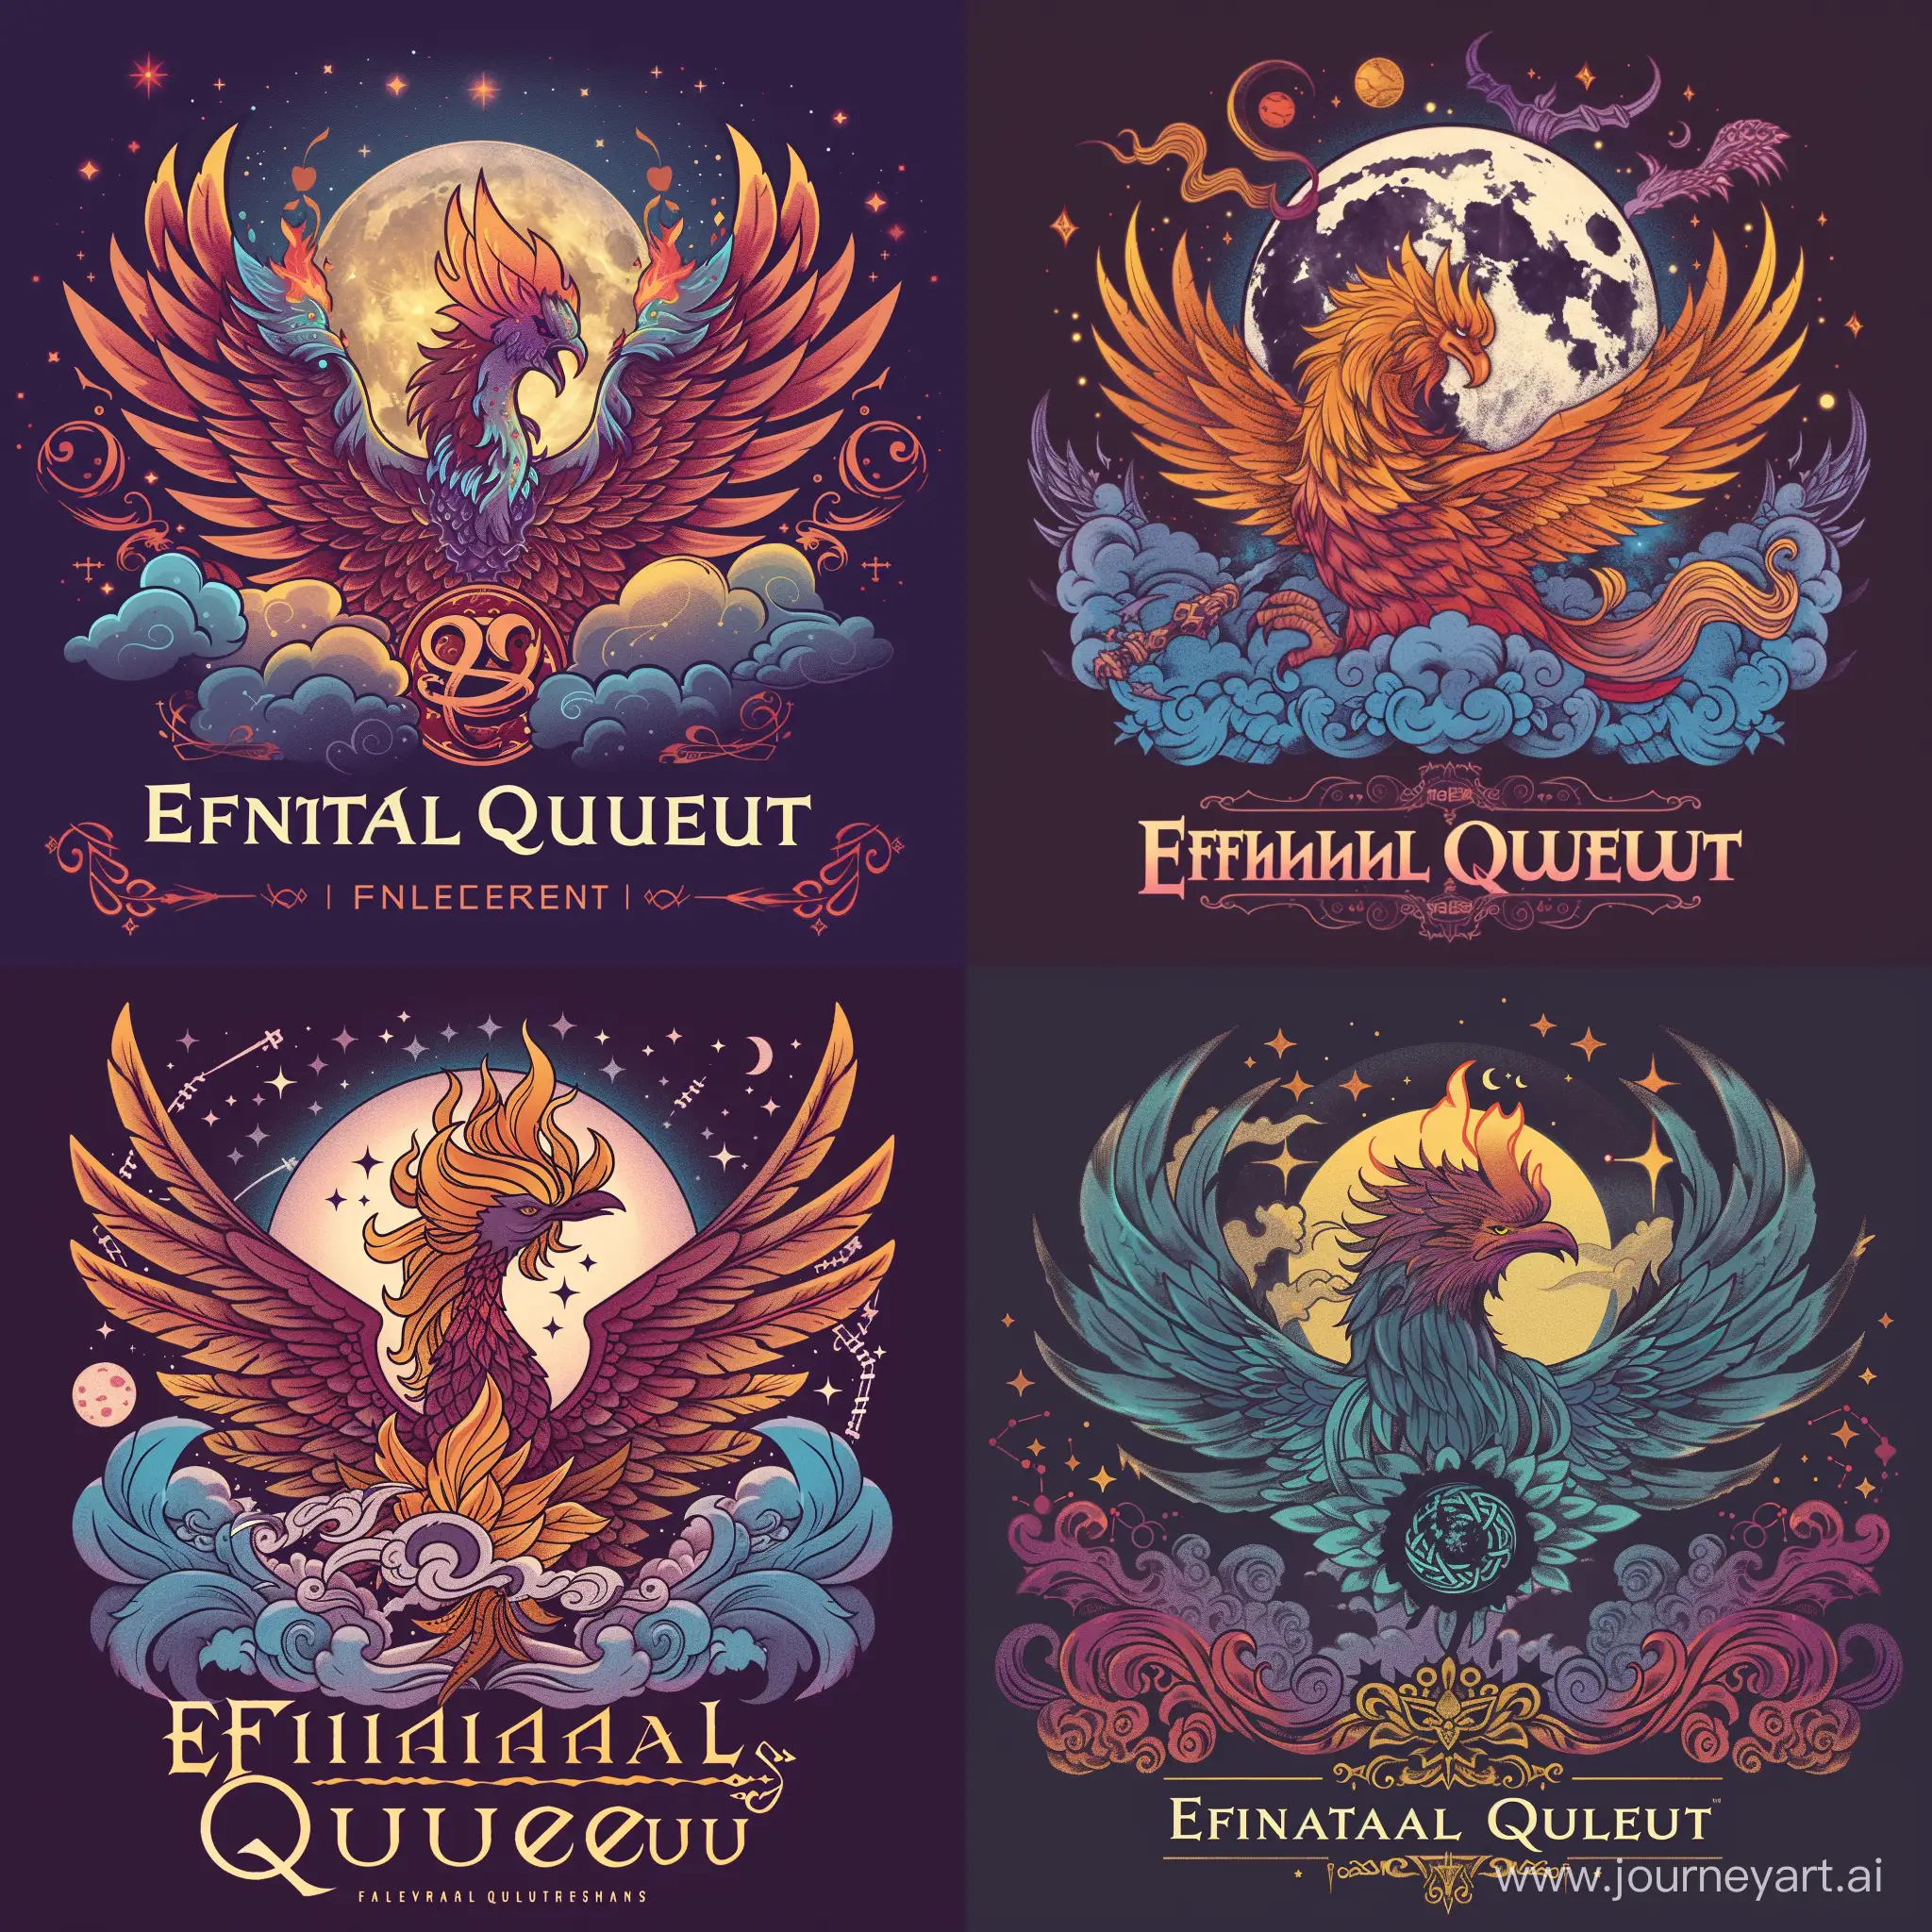 Majestic-Phoenix-Rising-Eternal-Quest-Logo-with-Magical-Flames-and-Moonlit-Sky